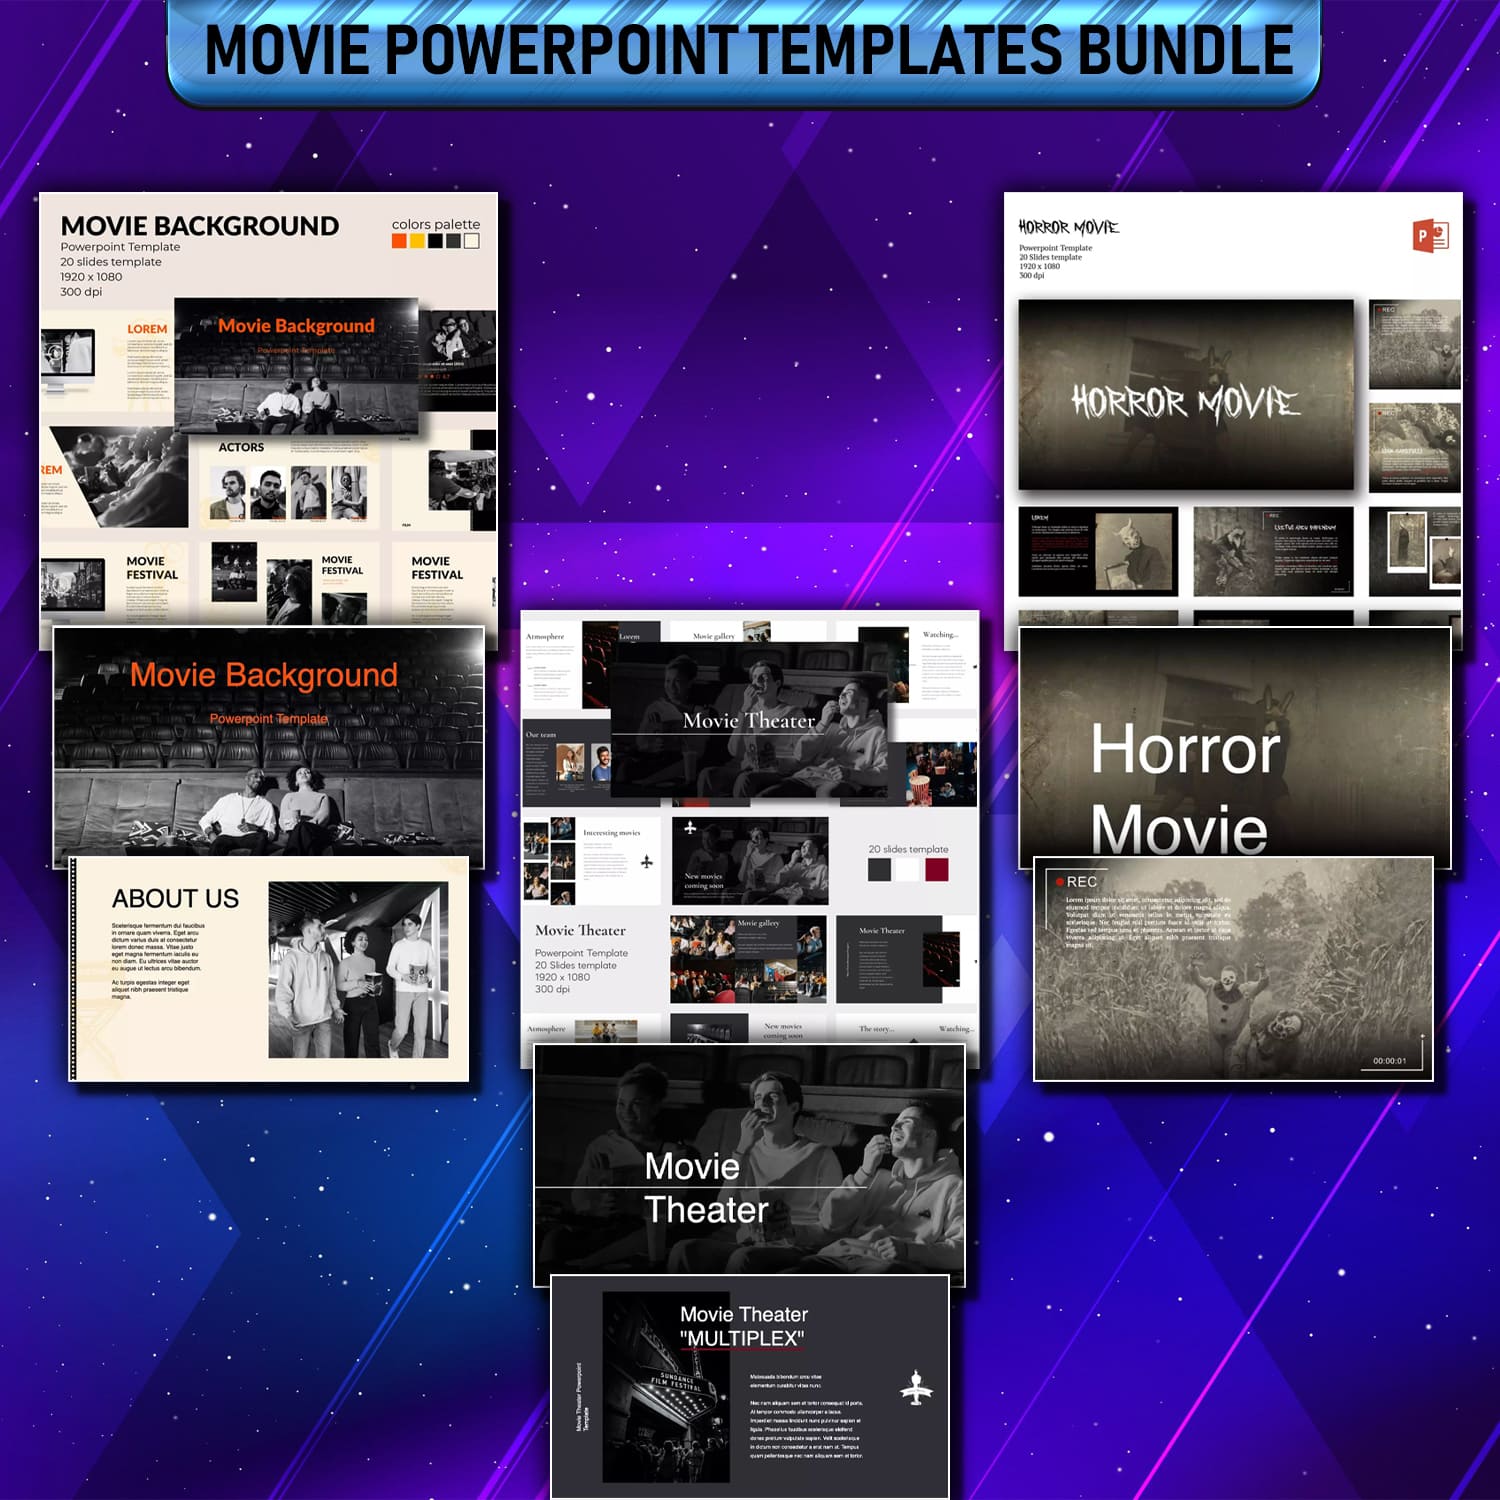 Movie Powerpoint Presentations Bundle cover image.